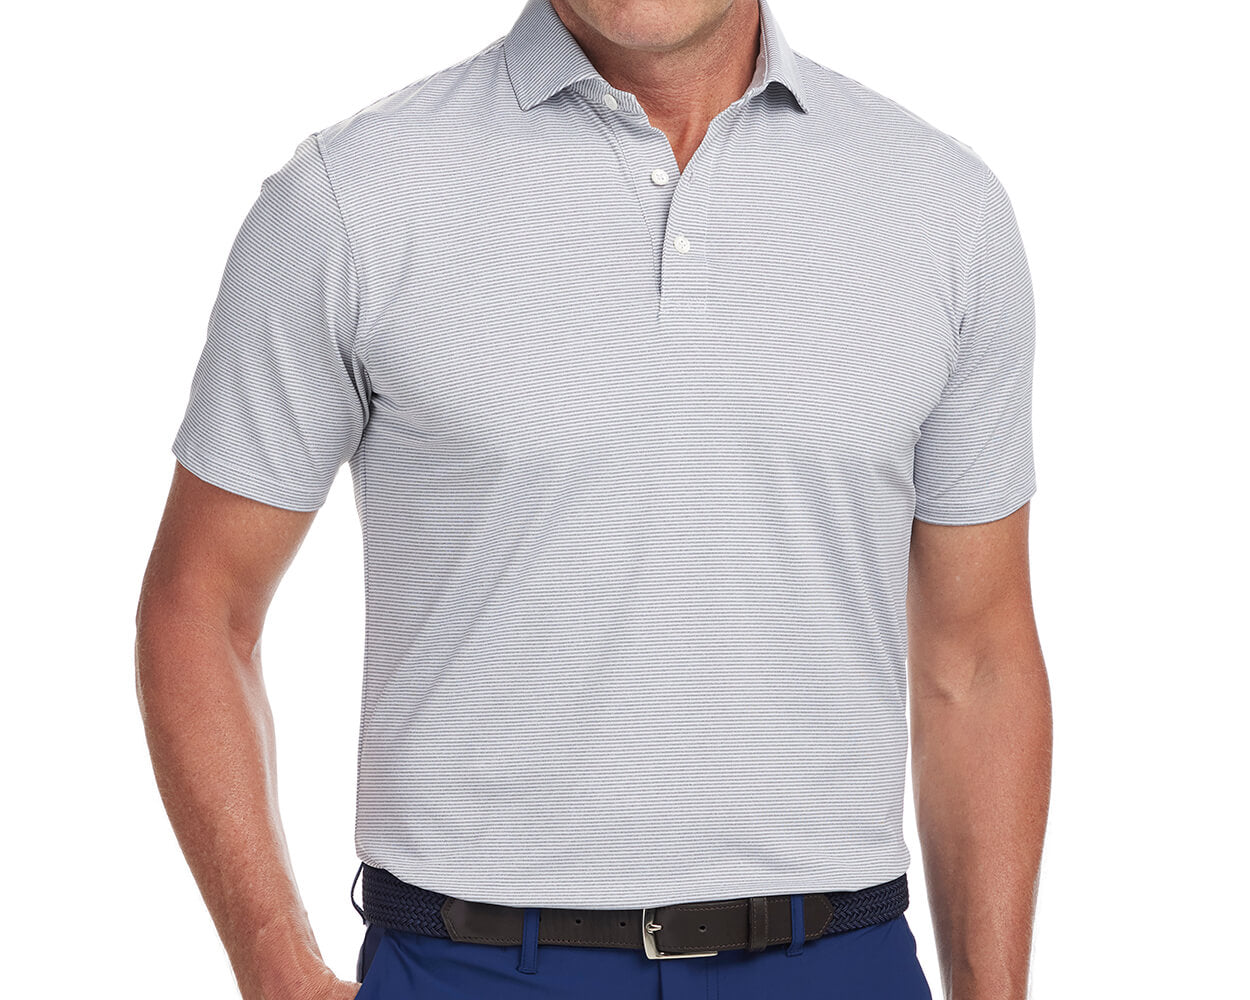 Holderness & Bourne Men's Gray and White Polo Shirt